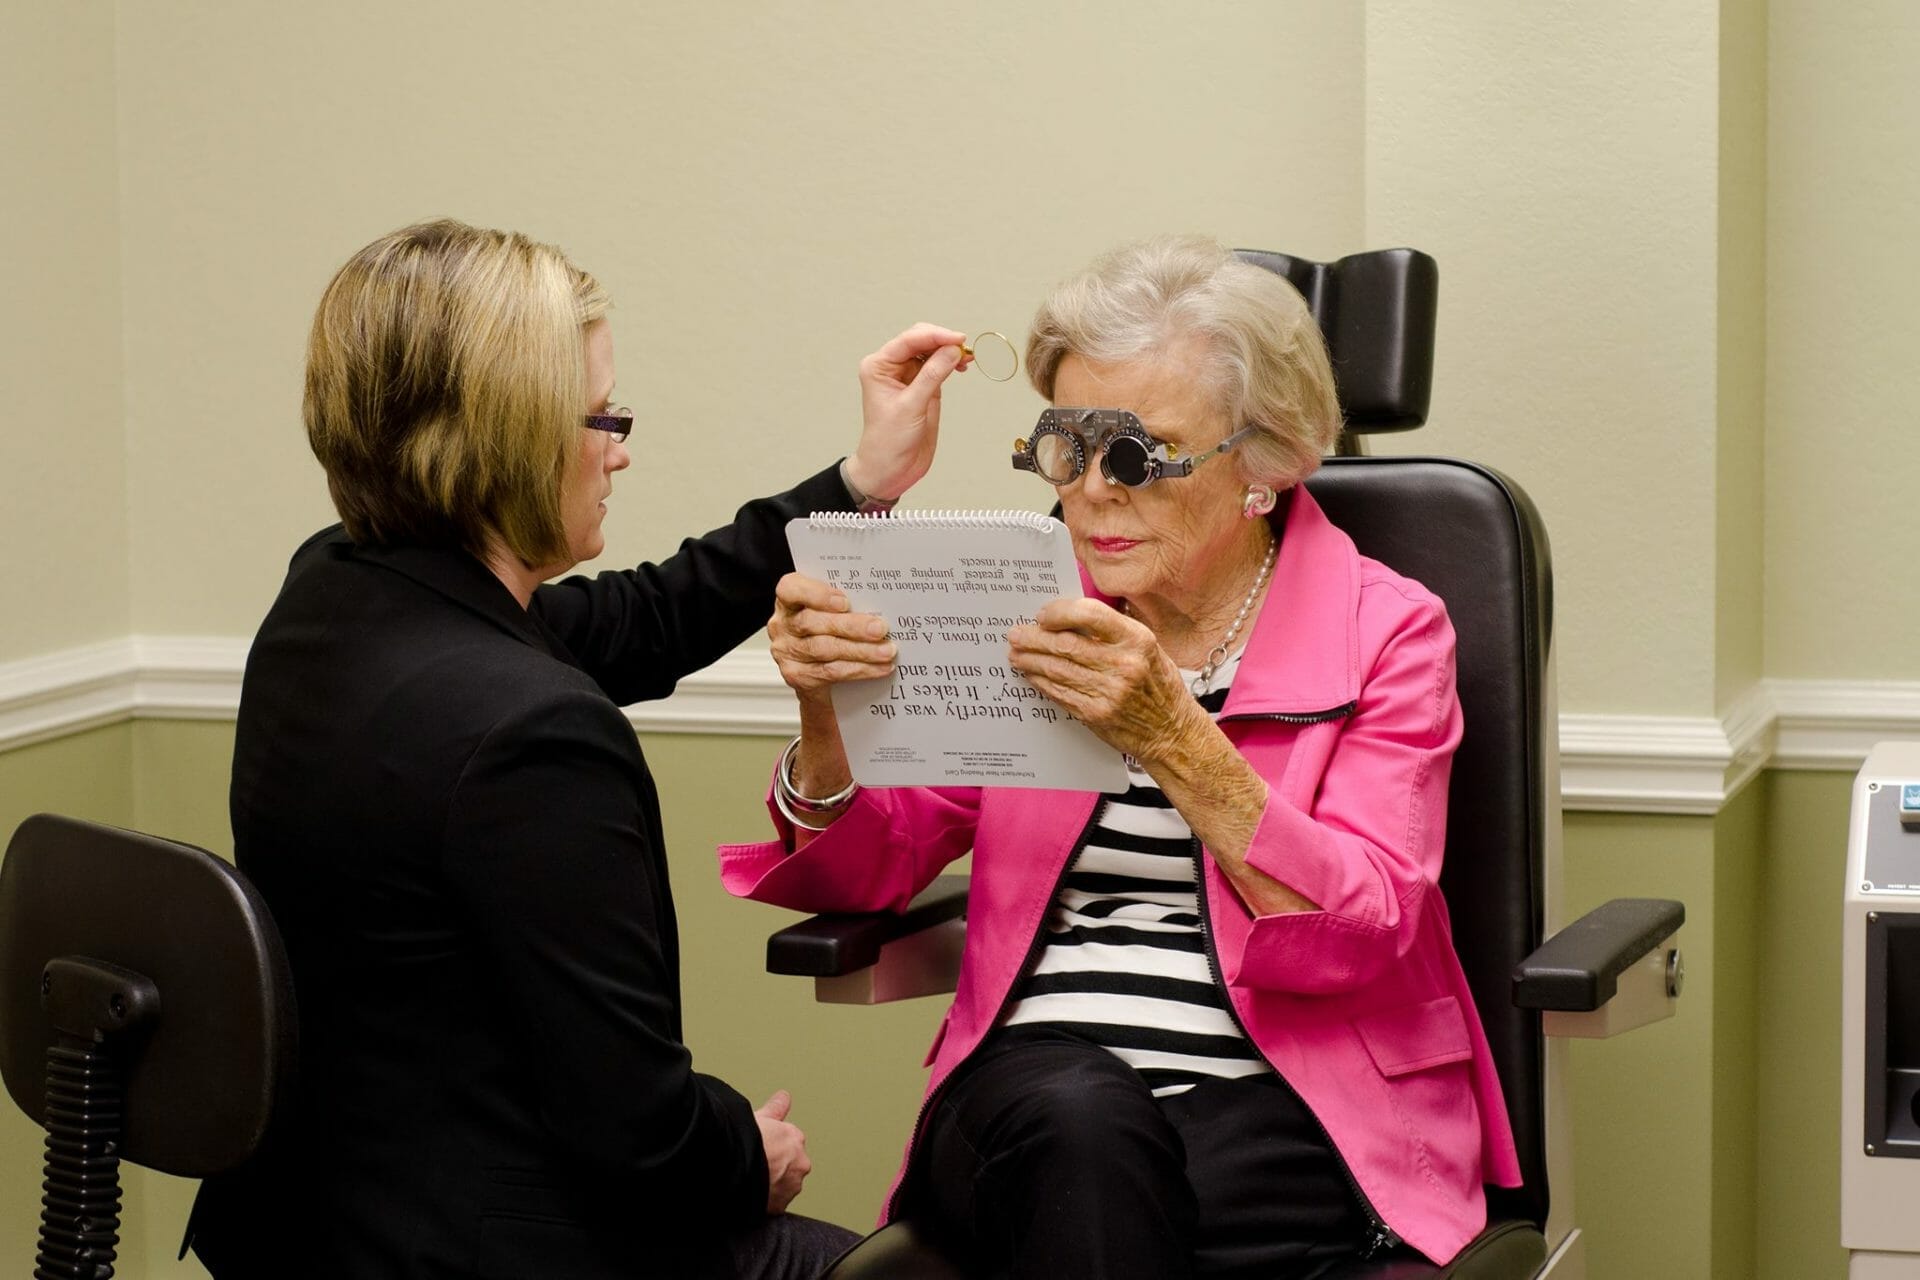 Coping with vision loss due to macular degeneration